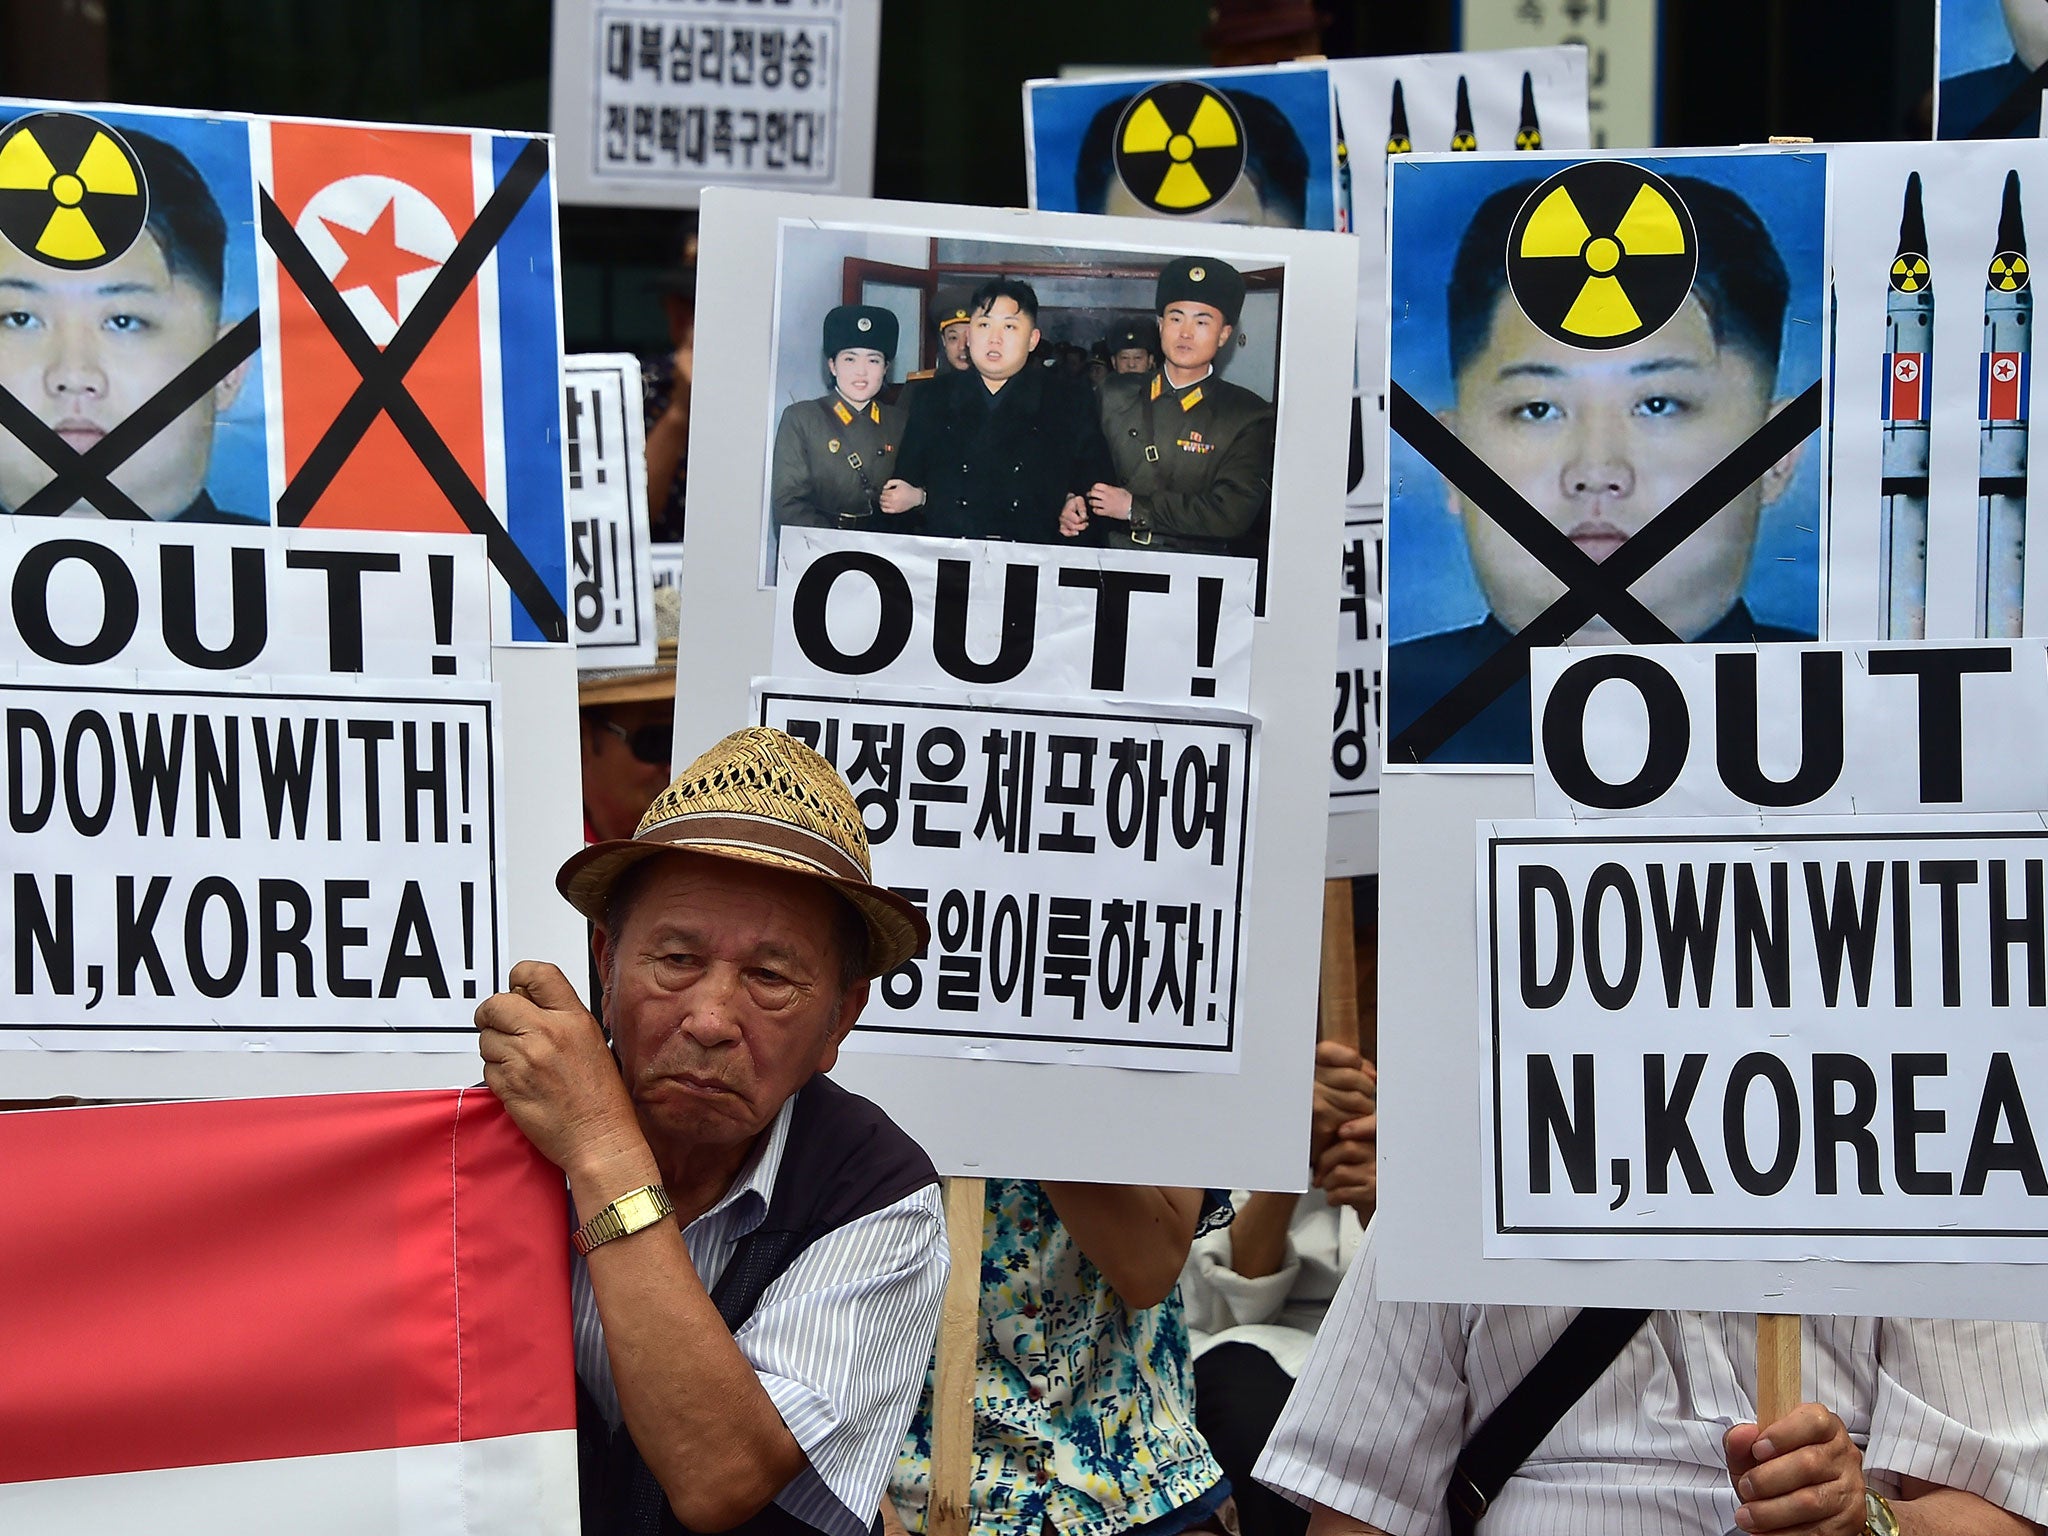 South Korean activists hold placards showing portraits of North Korean leader Kim Jong-Un during a rally denouncing North Korea's rocket firing, in Seoul on 21 August, 2015